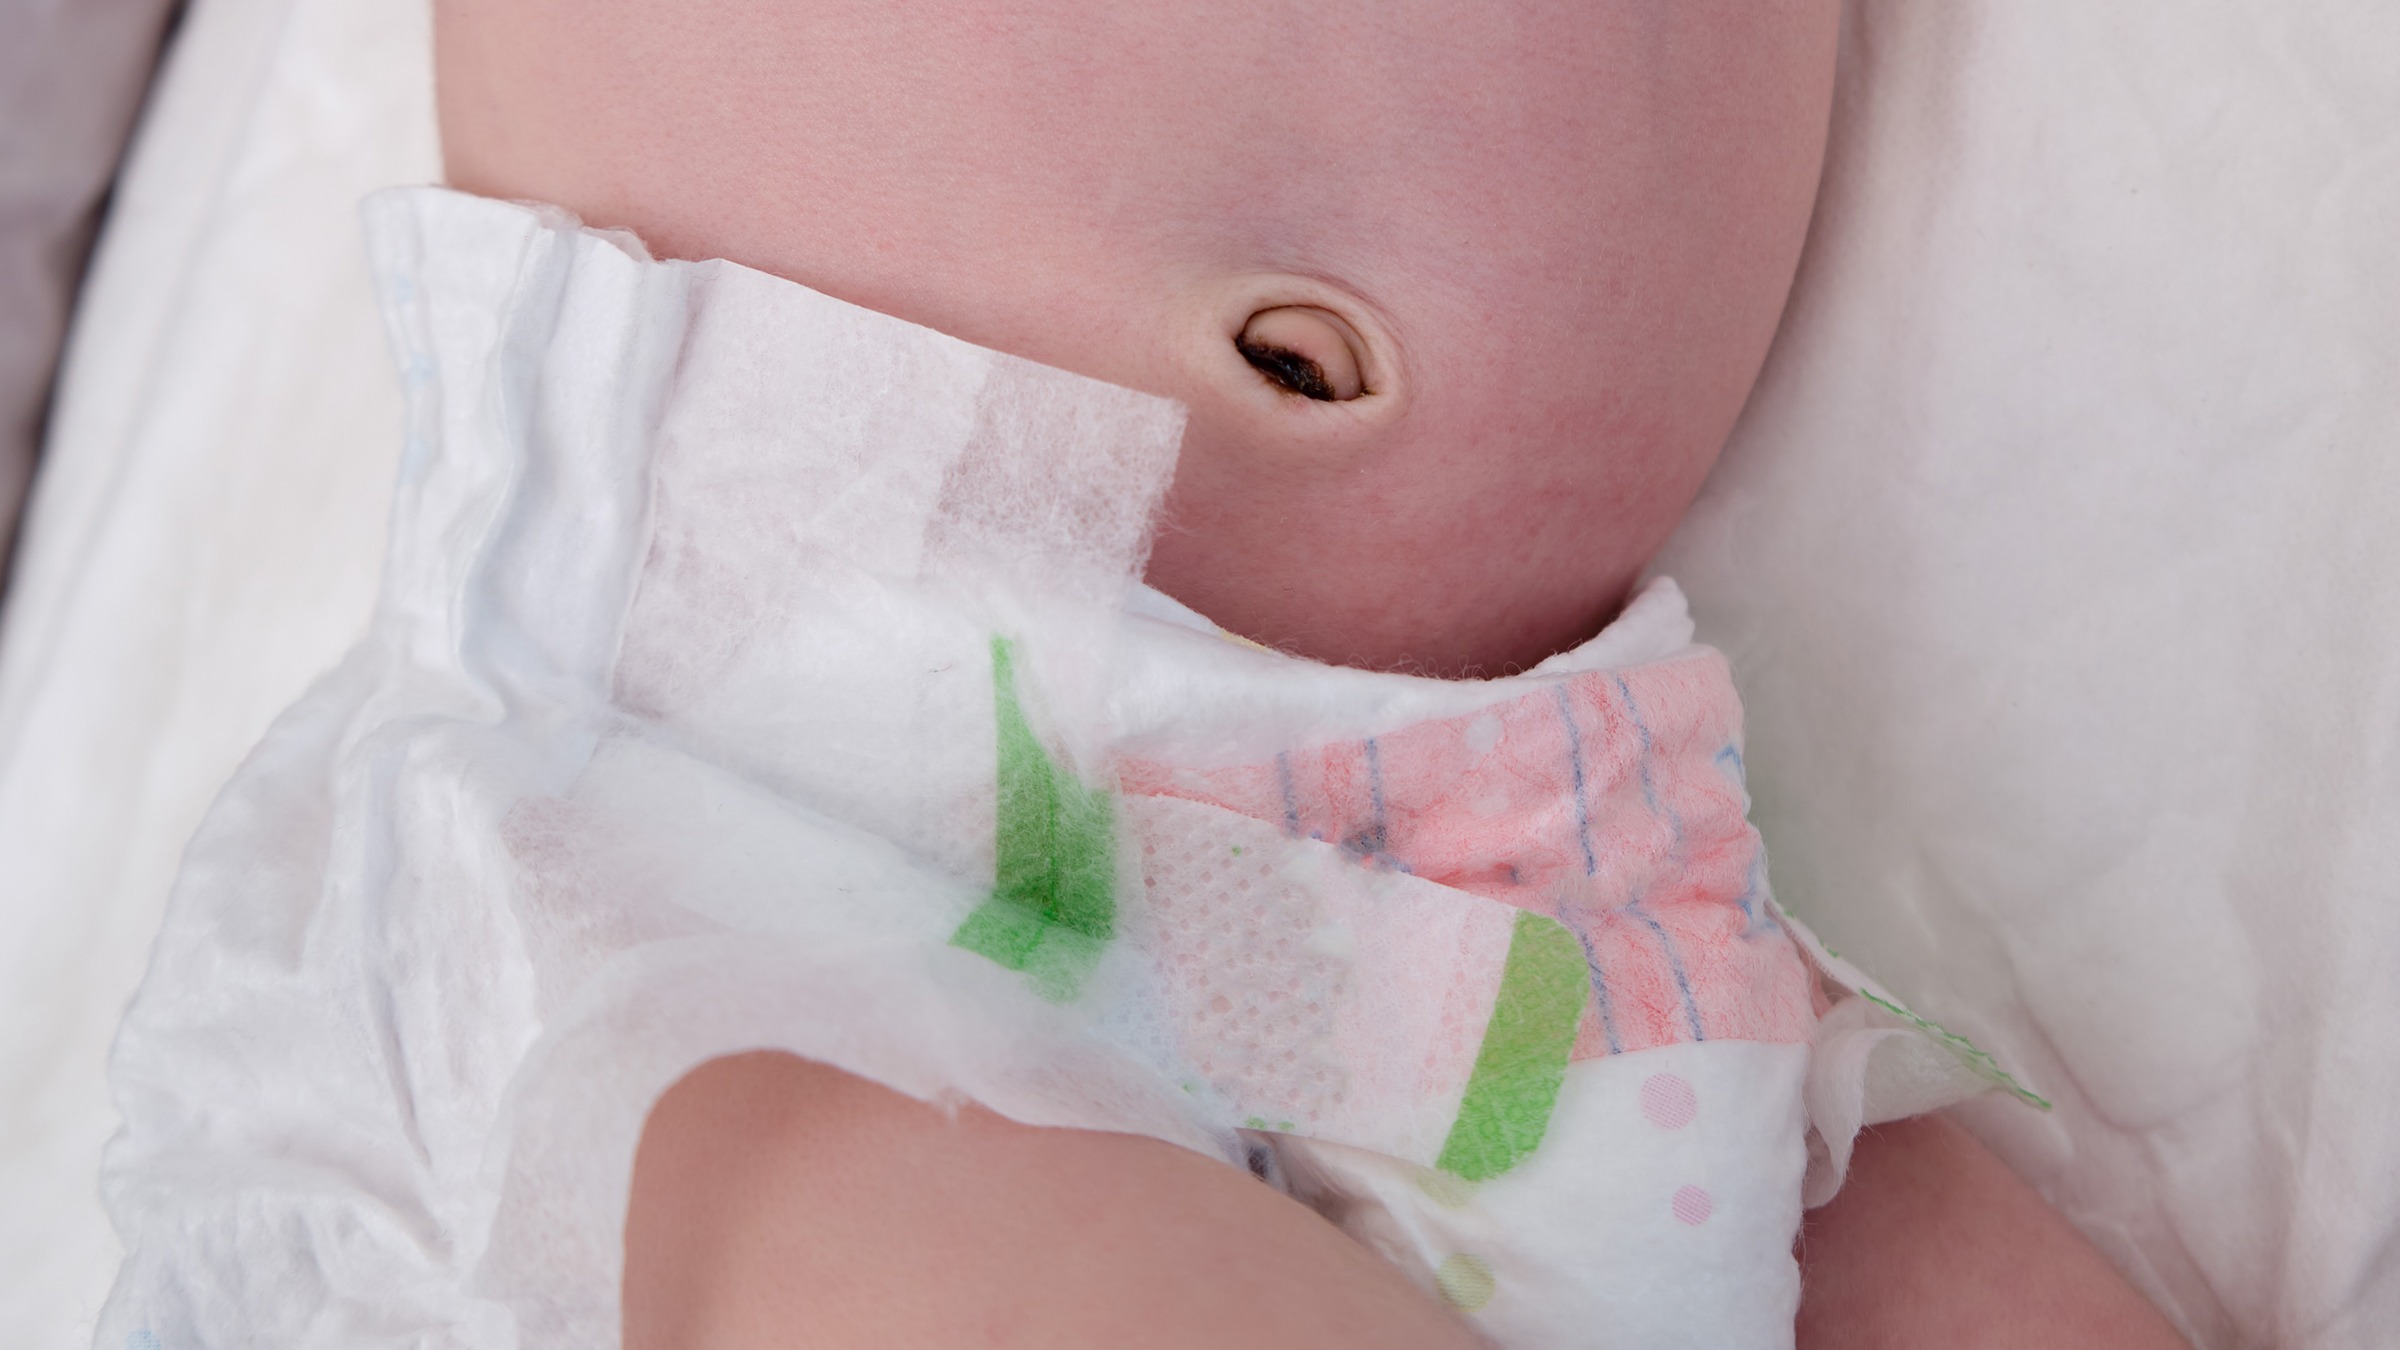 Proper care of baby's umbilical cord 